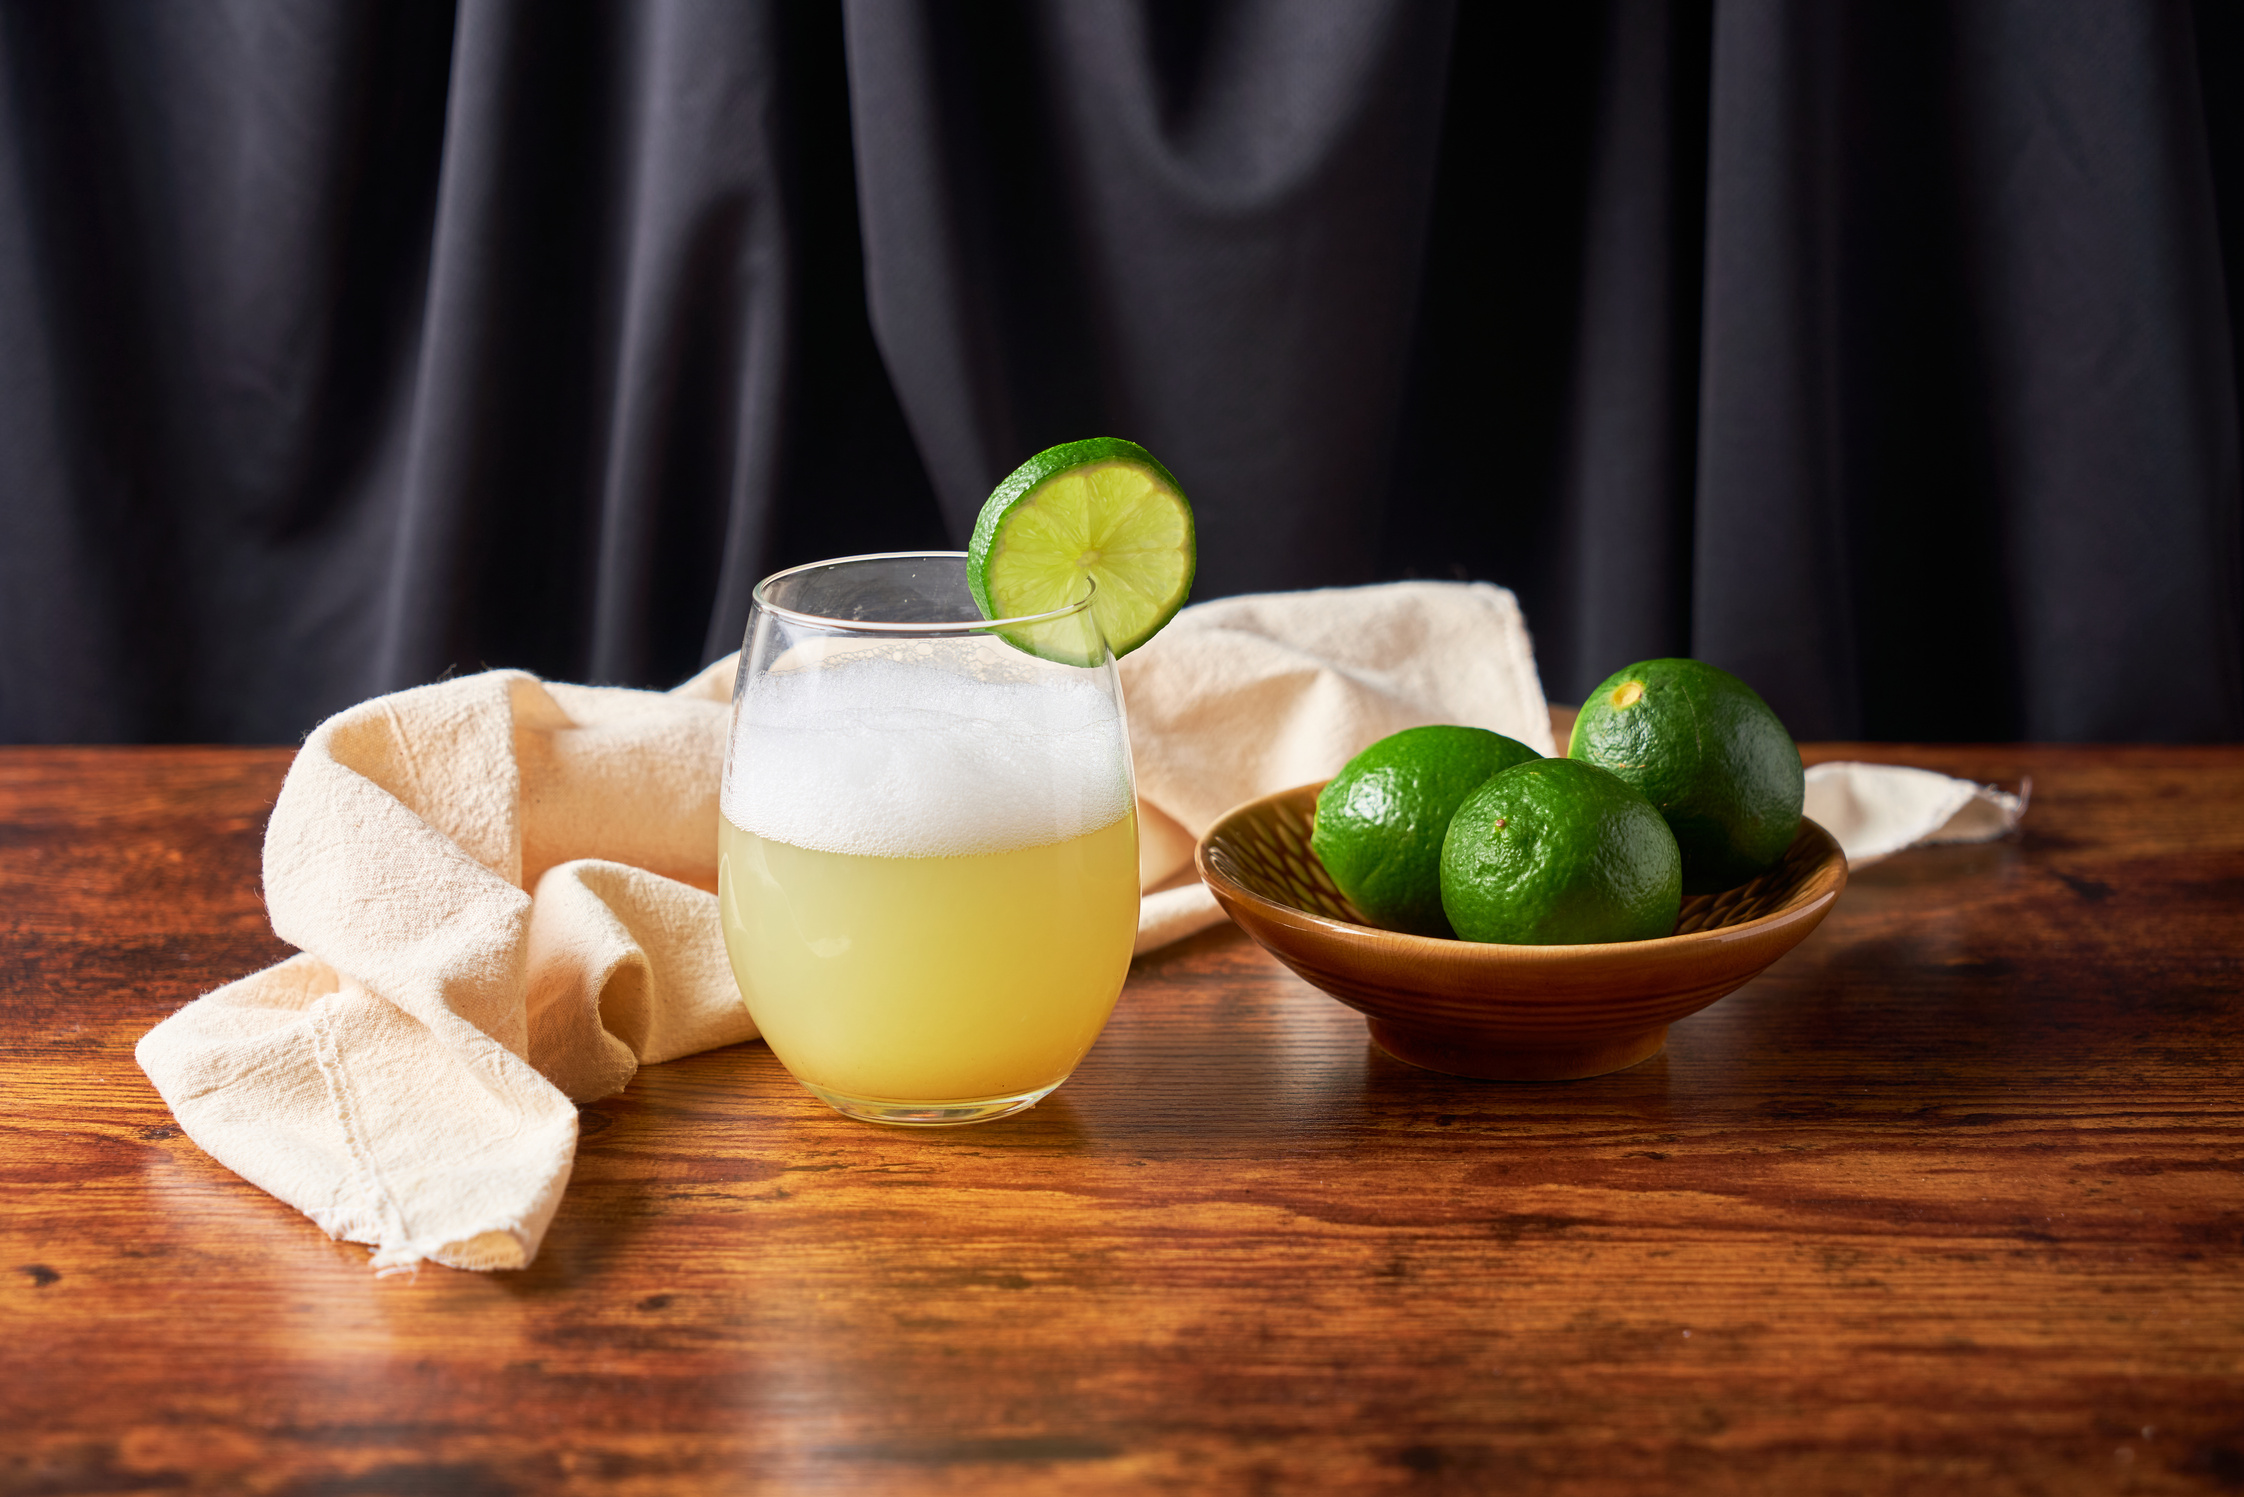 Homemade Pisco Sour Cocktail with Lime and Bitters